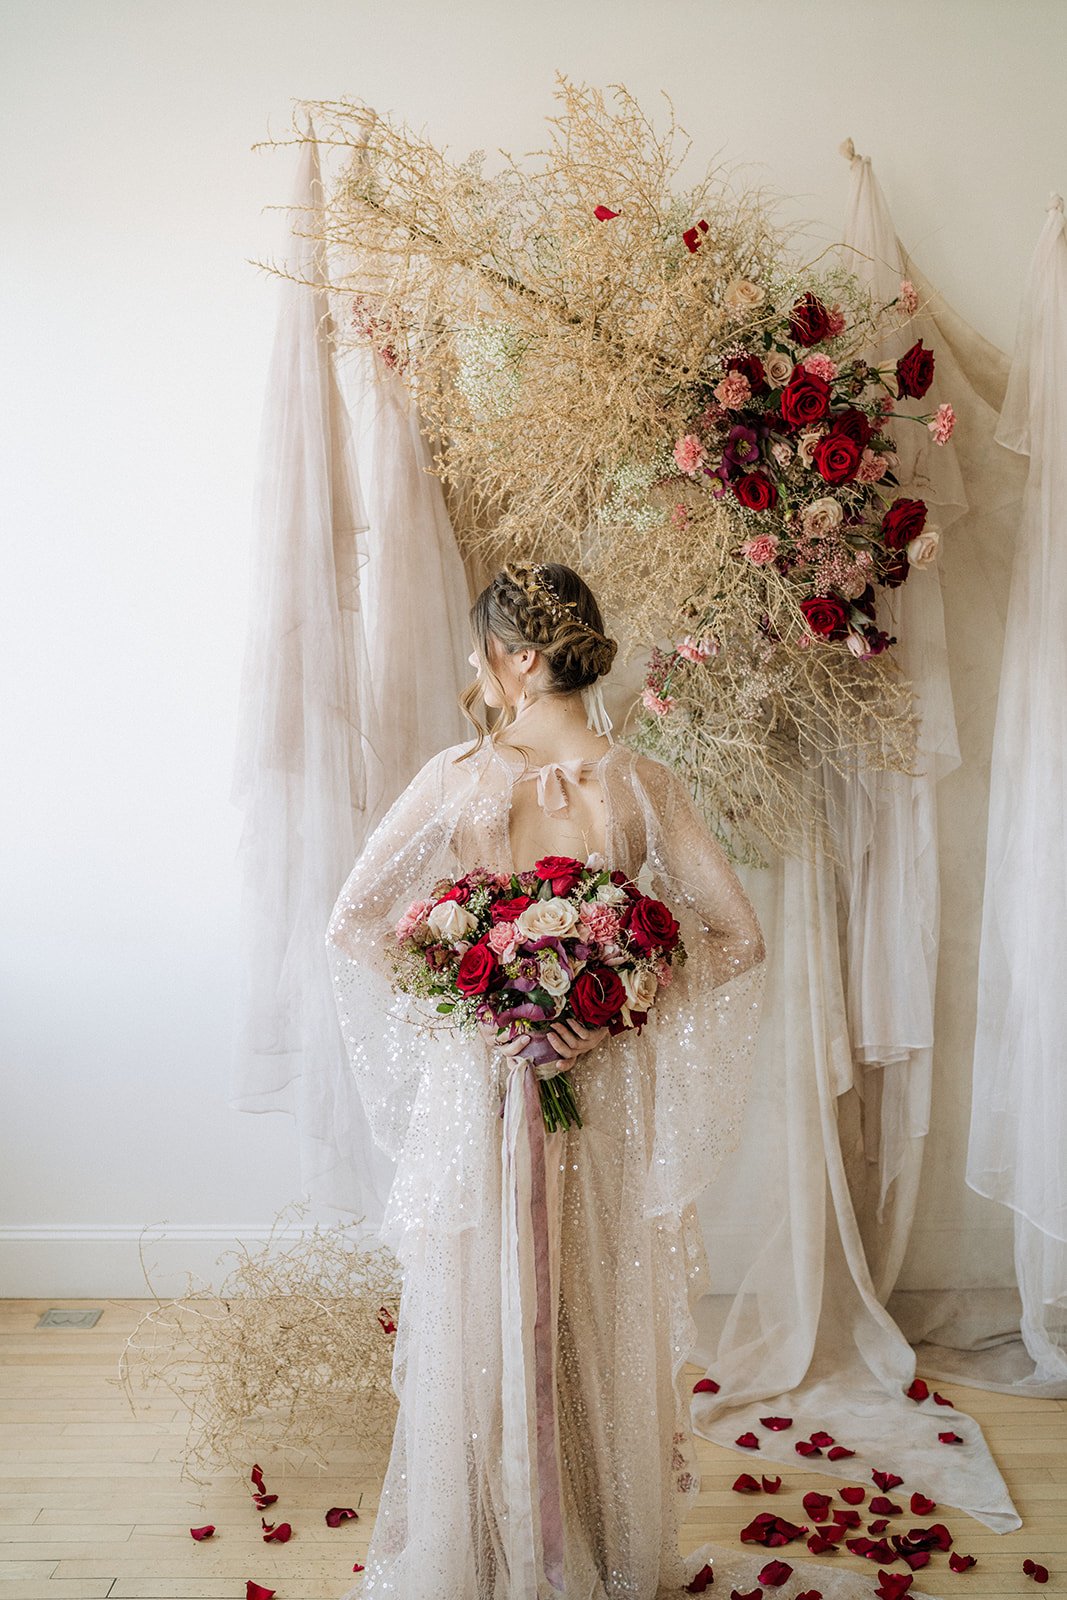  Sandstone Chiffon with Rose Clay Tulle ・  Marley Felicia Photography  ・  Petal and Stem Florals  